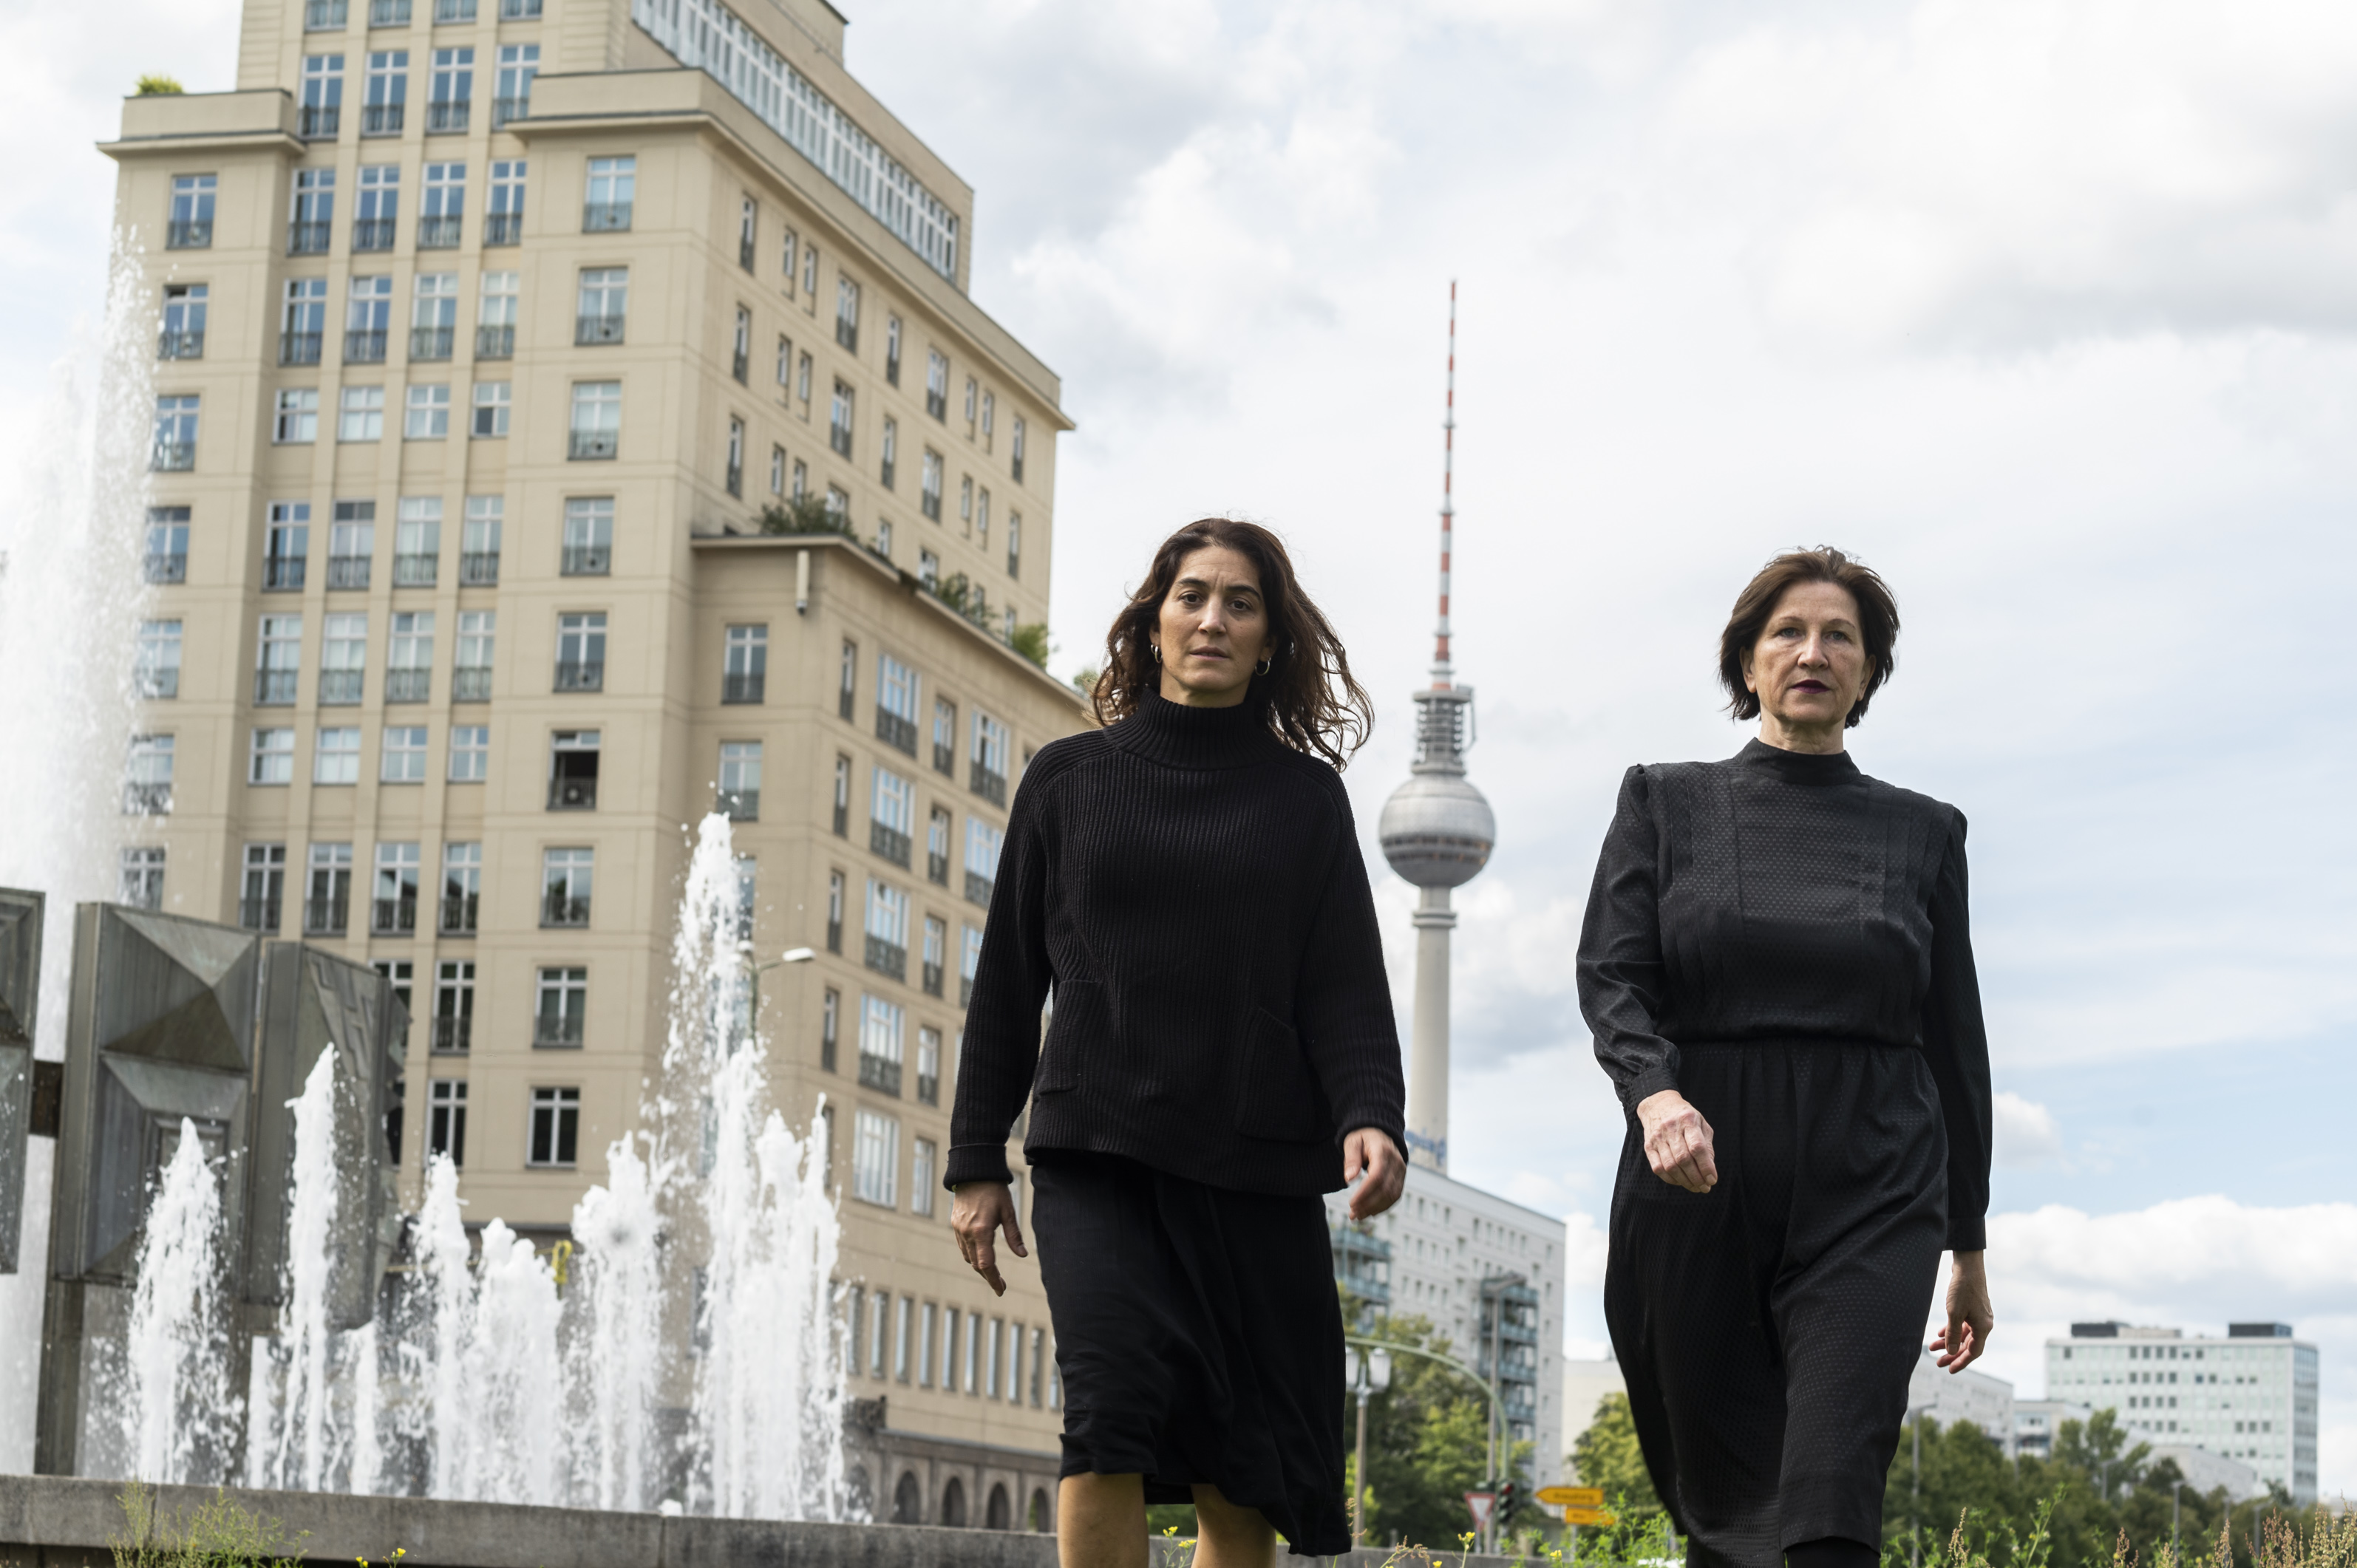 Two women dressed in black, this time unmasked, walk through Berlin. Behind them, the television tower can be seen.